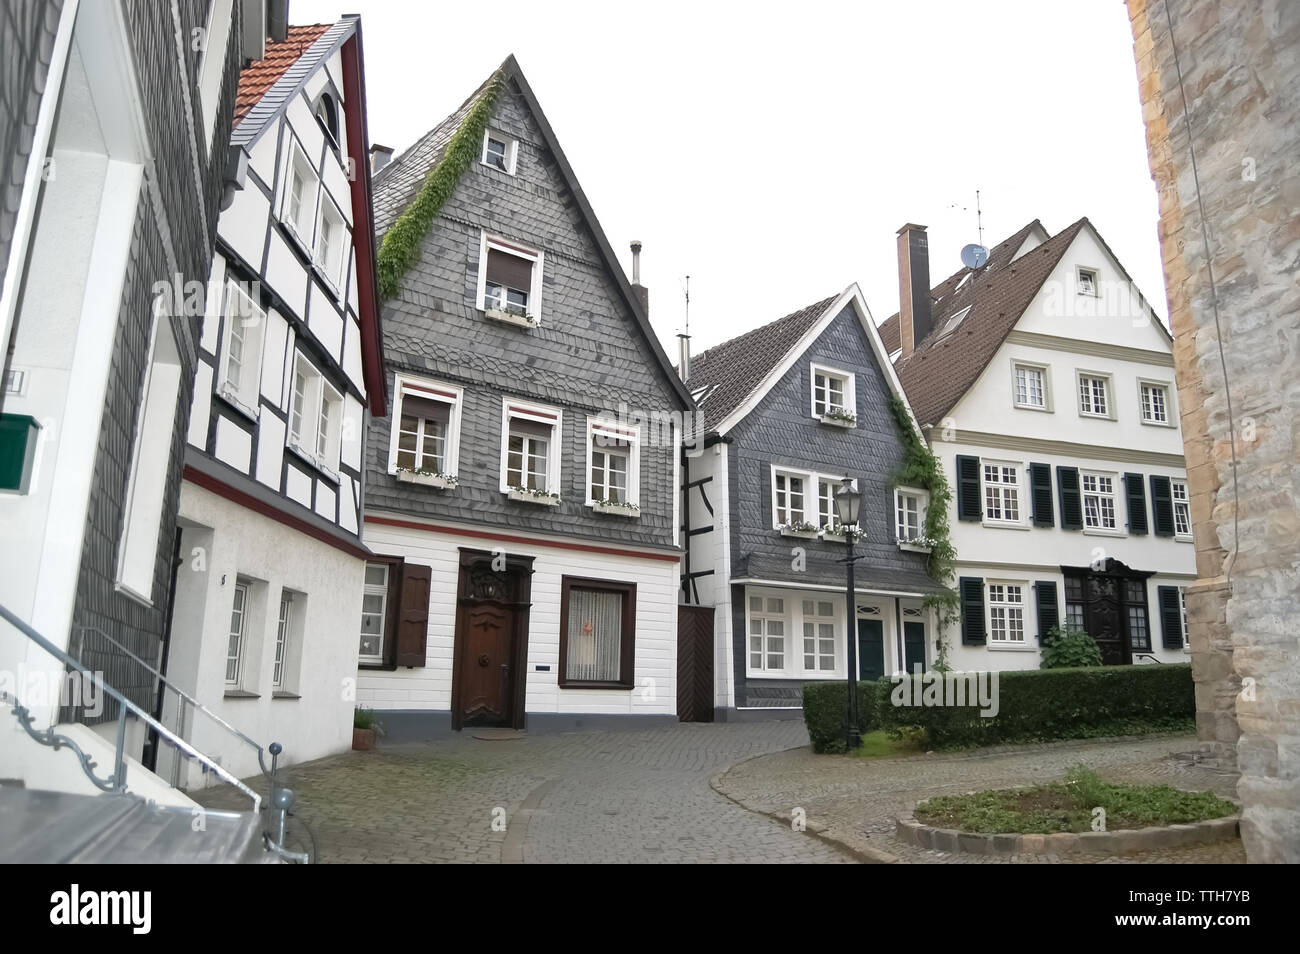 Street view with historical timber frame houses in Kettwig old town, Germany. Stock Photo